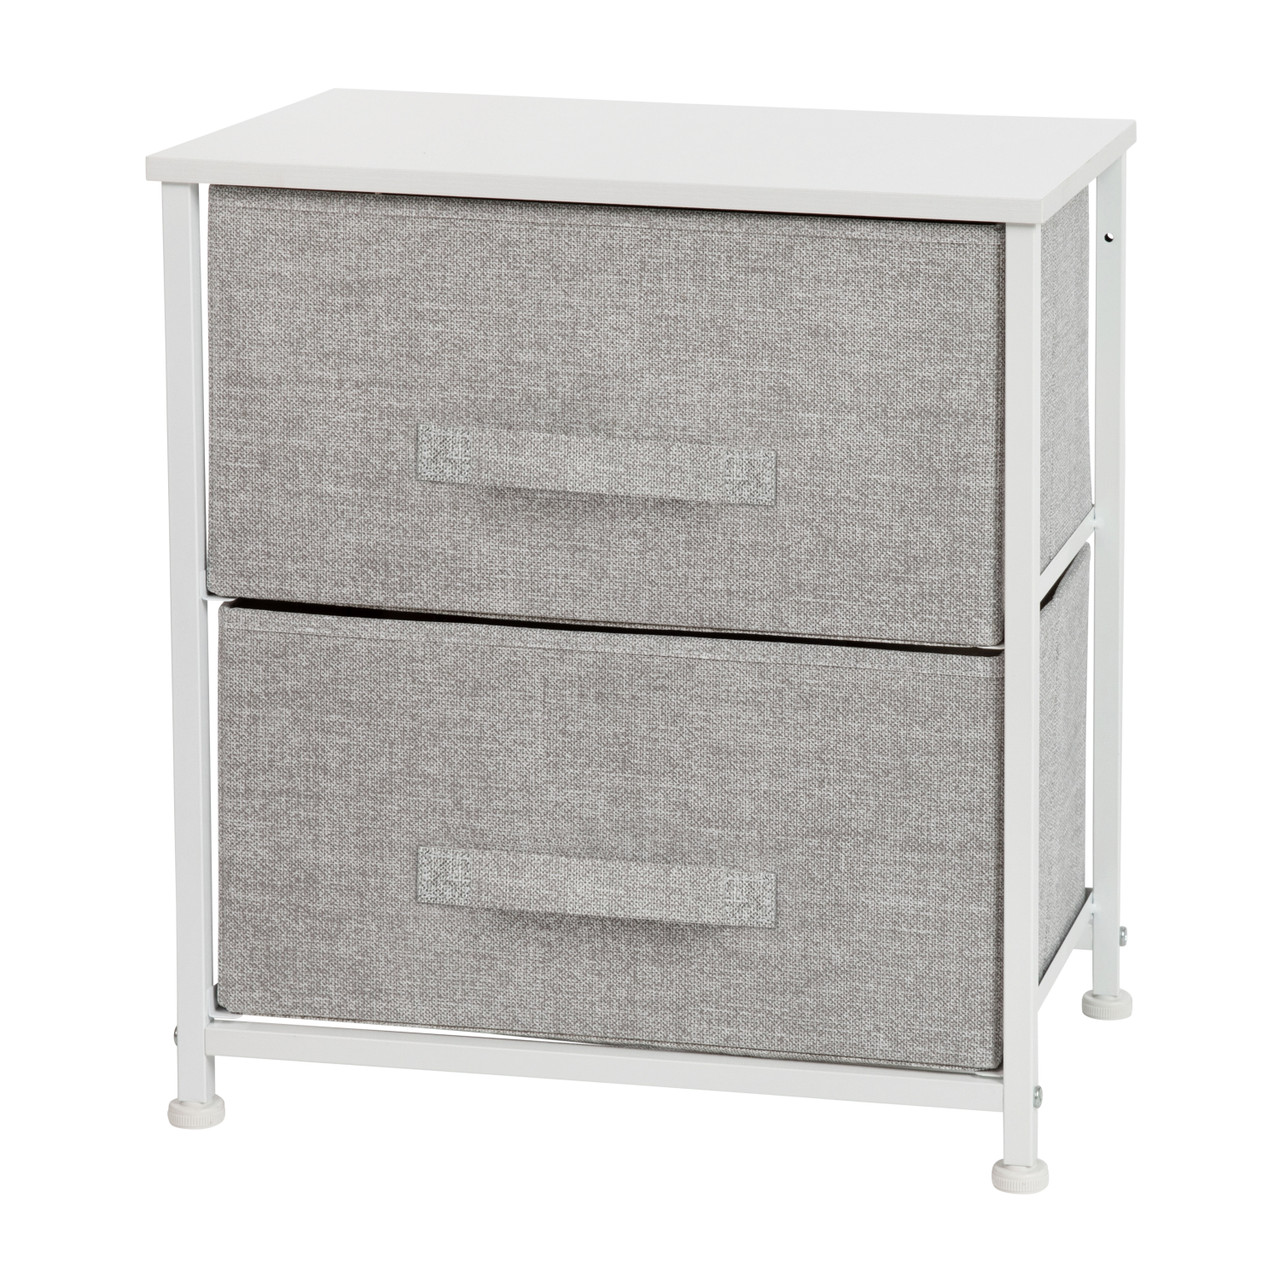 Flash Furniture 2 Drawer Wood Top White Nightstand Storage Organizer with Cast Iron Frame and Light Gray Easy Pull Fabric Drawers, Model#